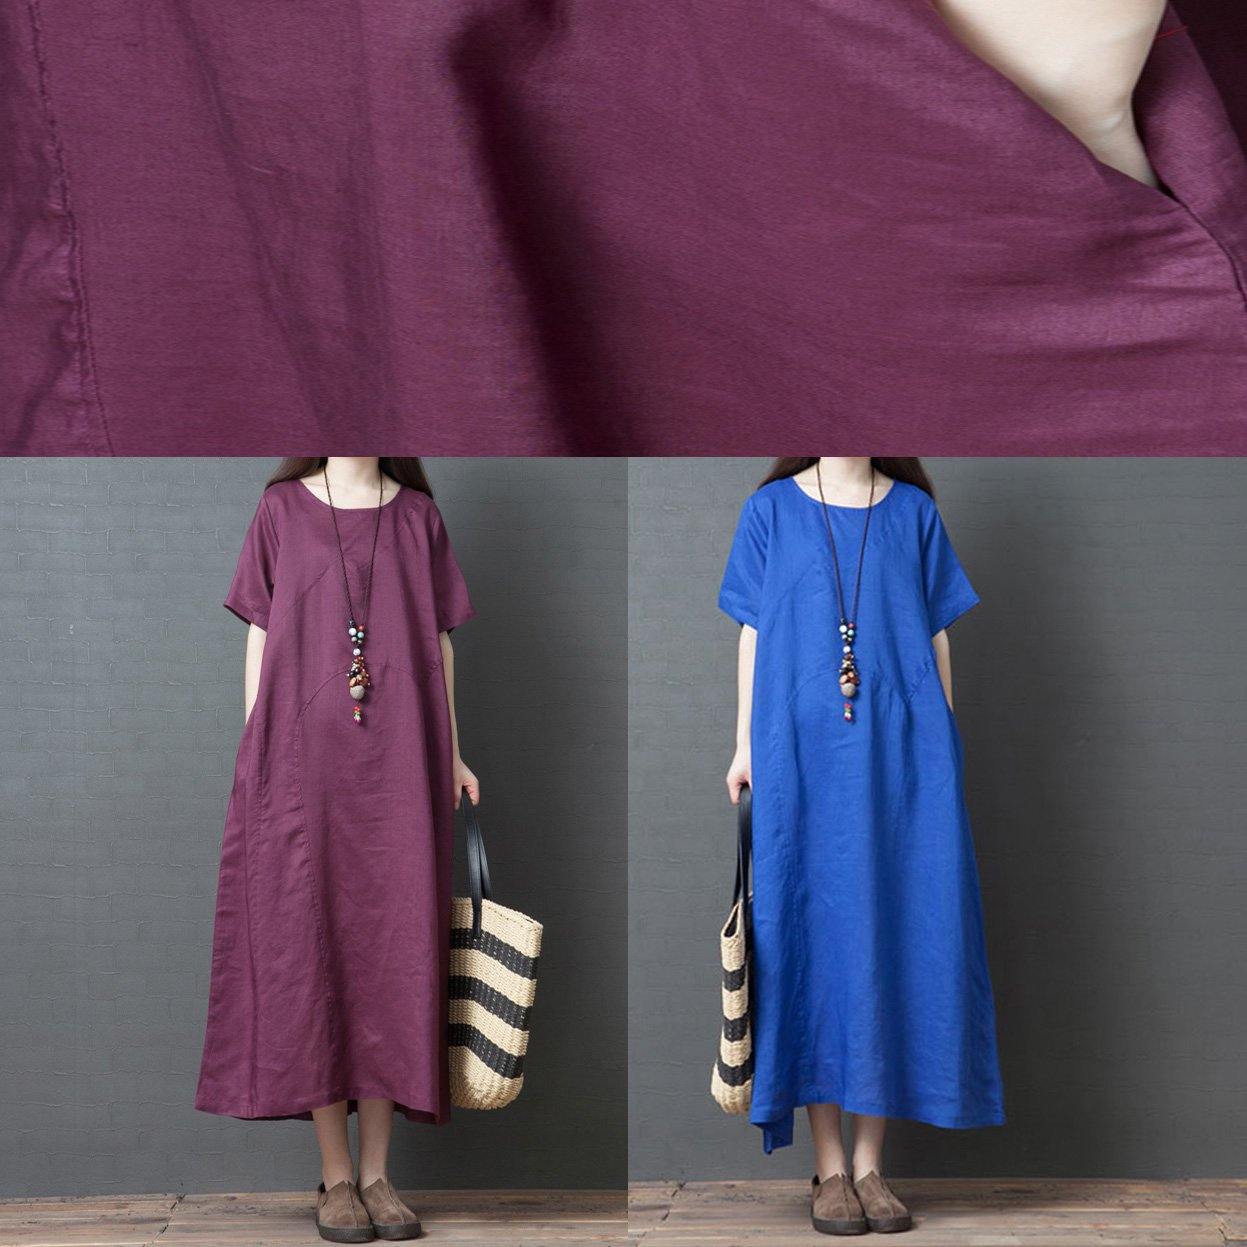 French o neck pockets linen clothes Work Outfits purple cotton robes Dress summer - Omychic